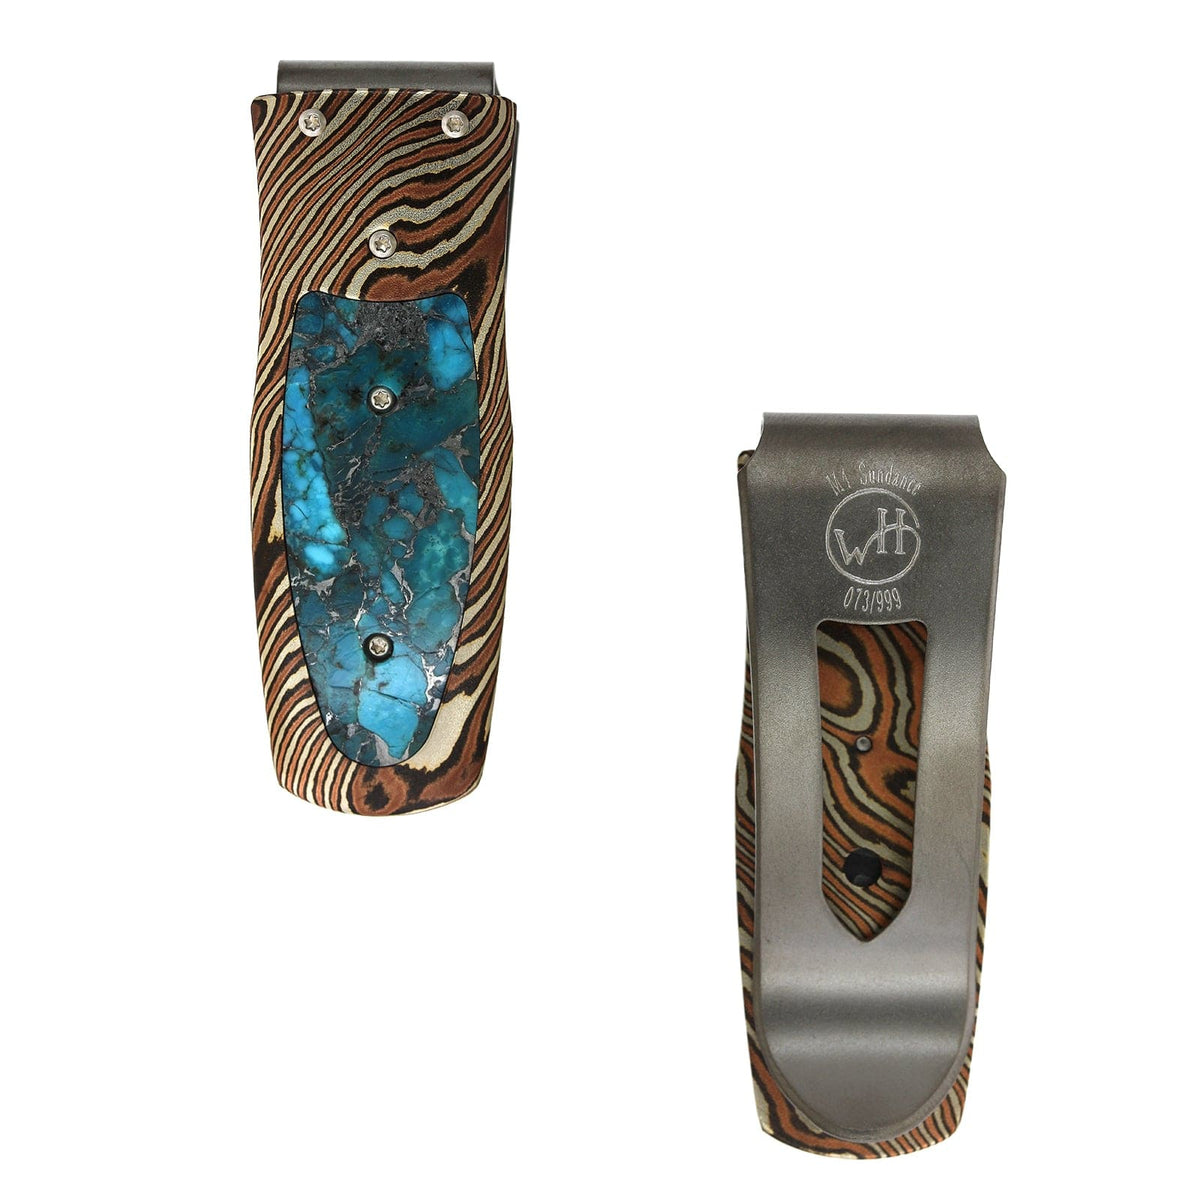 Stainless Steel Turquoise Money Clip